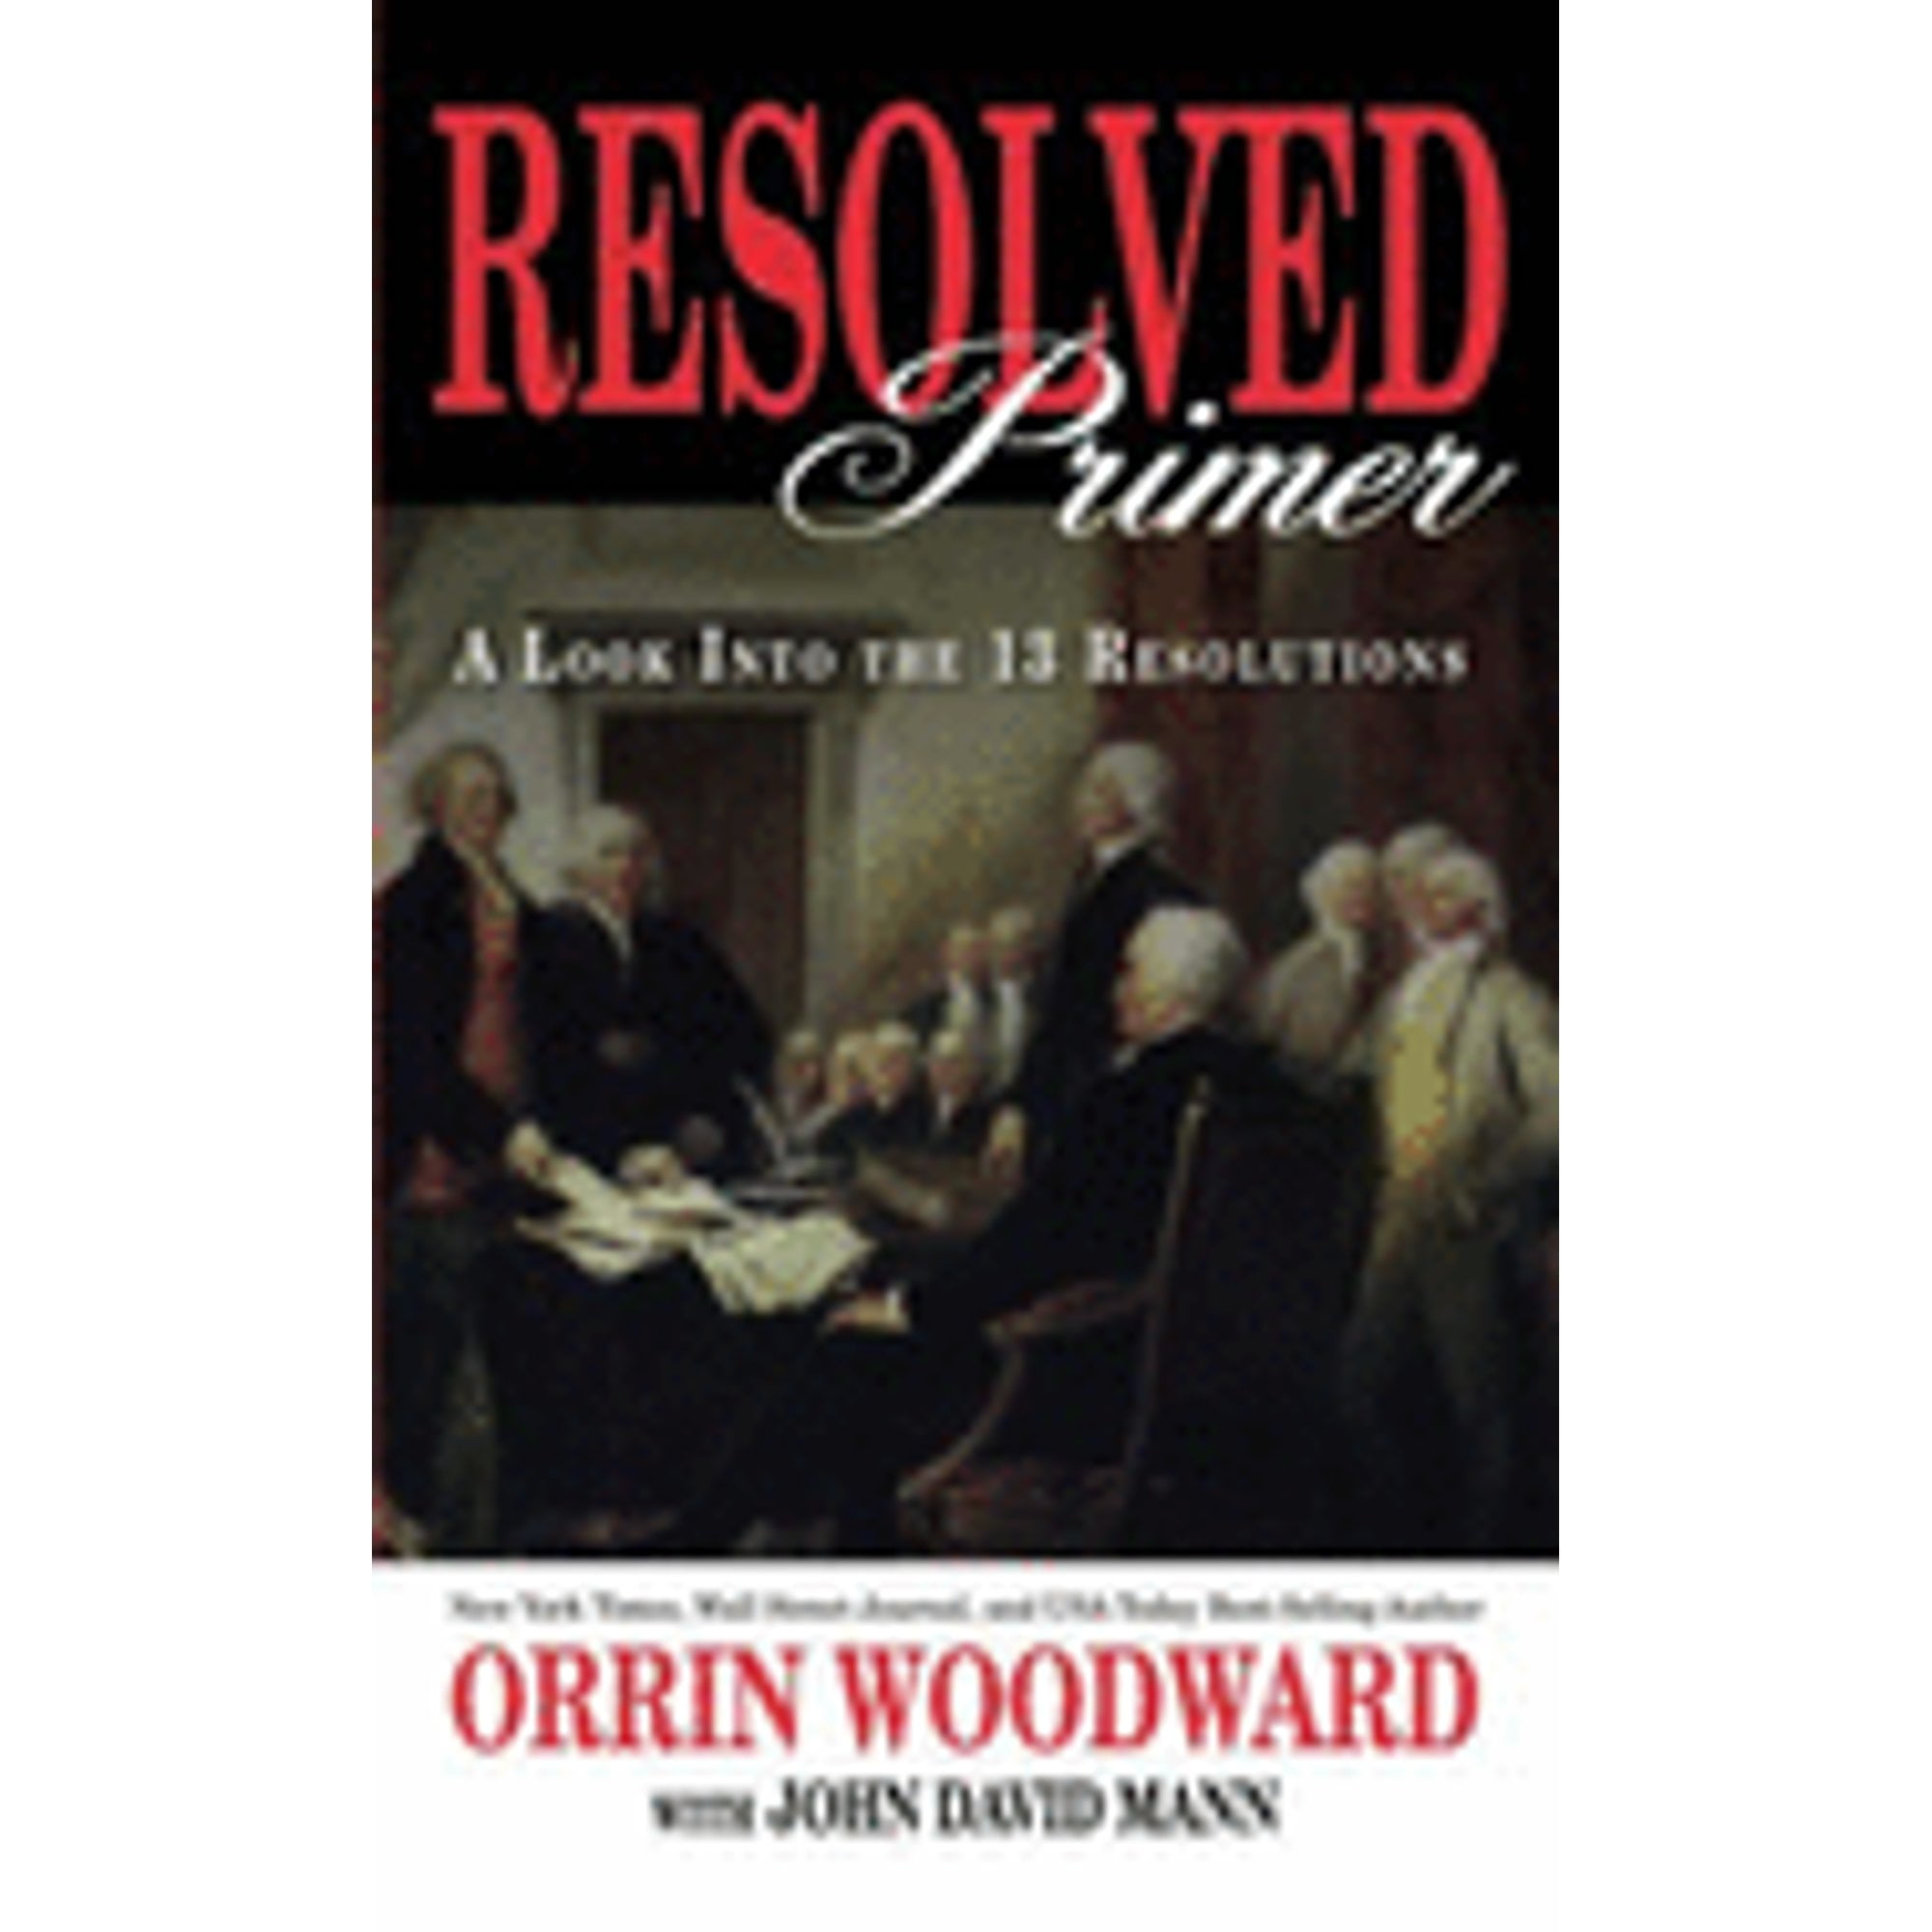 Pre-Owned Resolved Primer - A Look Into the 13 Resolutions  Paperback Orrin Woodward